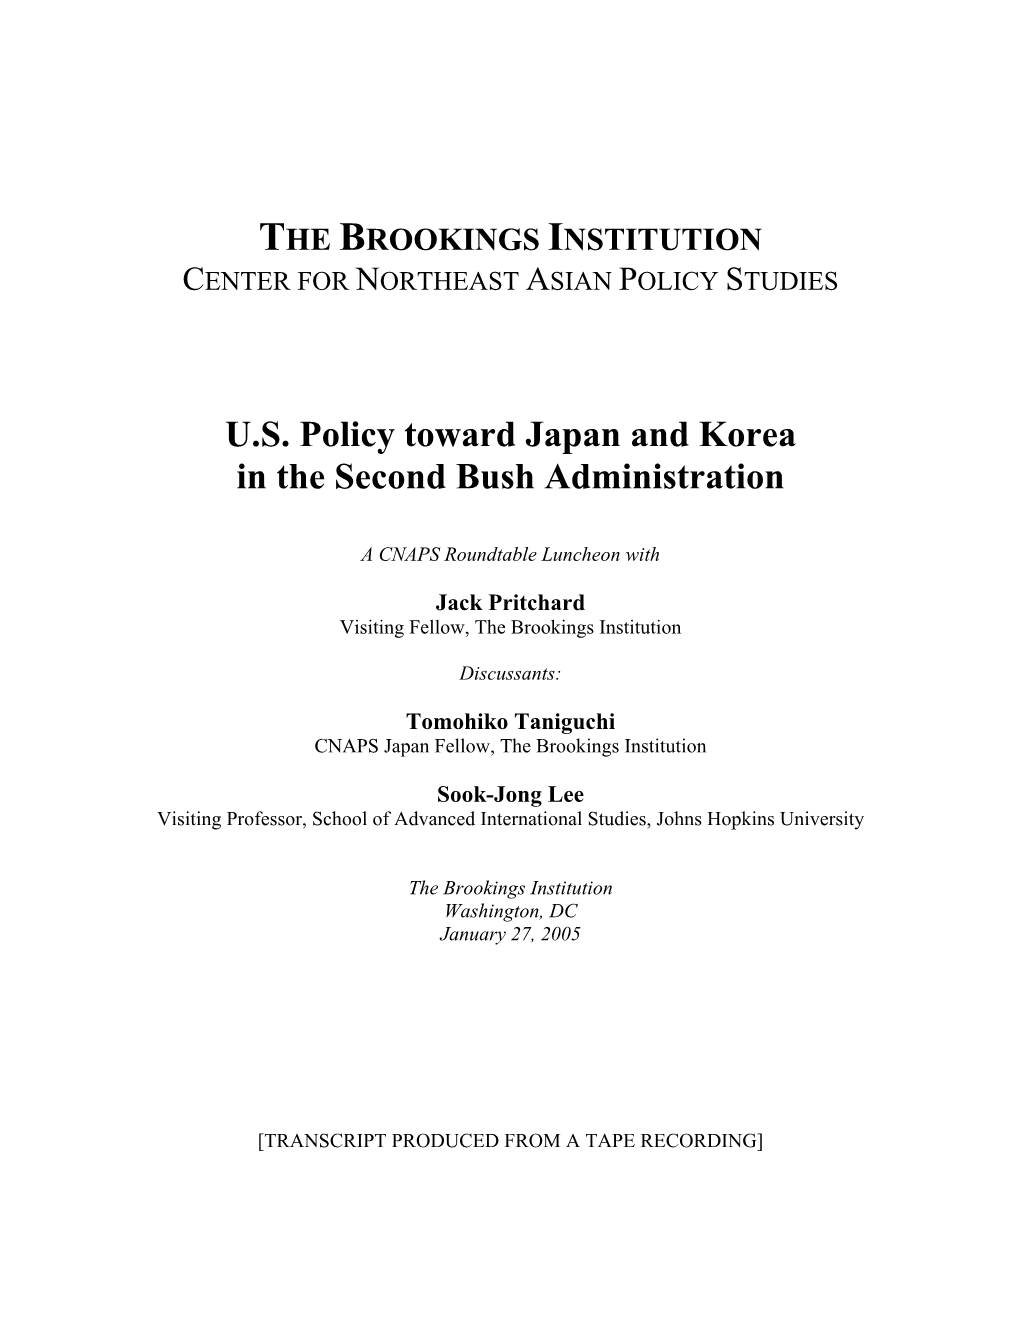 US Policy Toward Japan and Korea in the Second Bush Administration